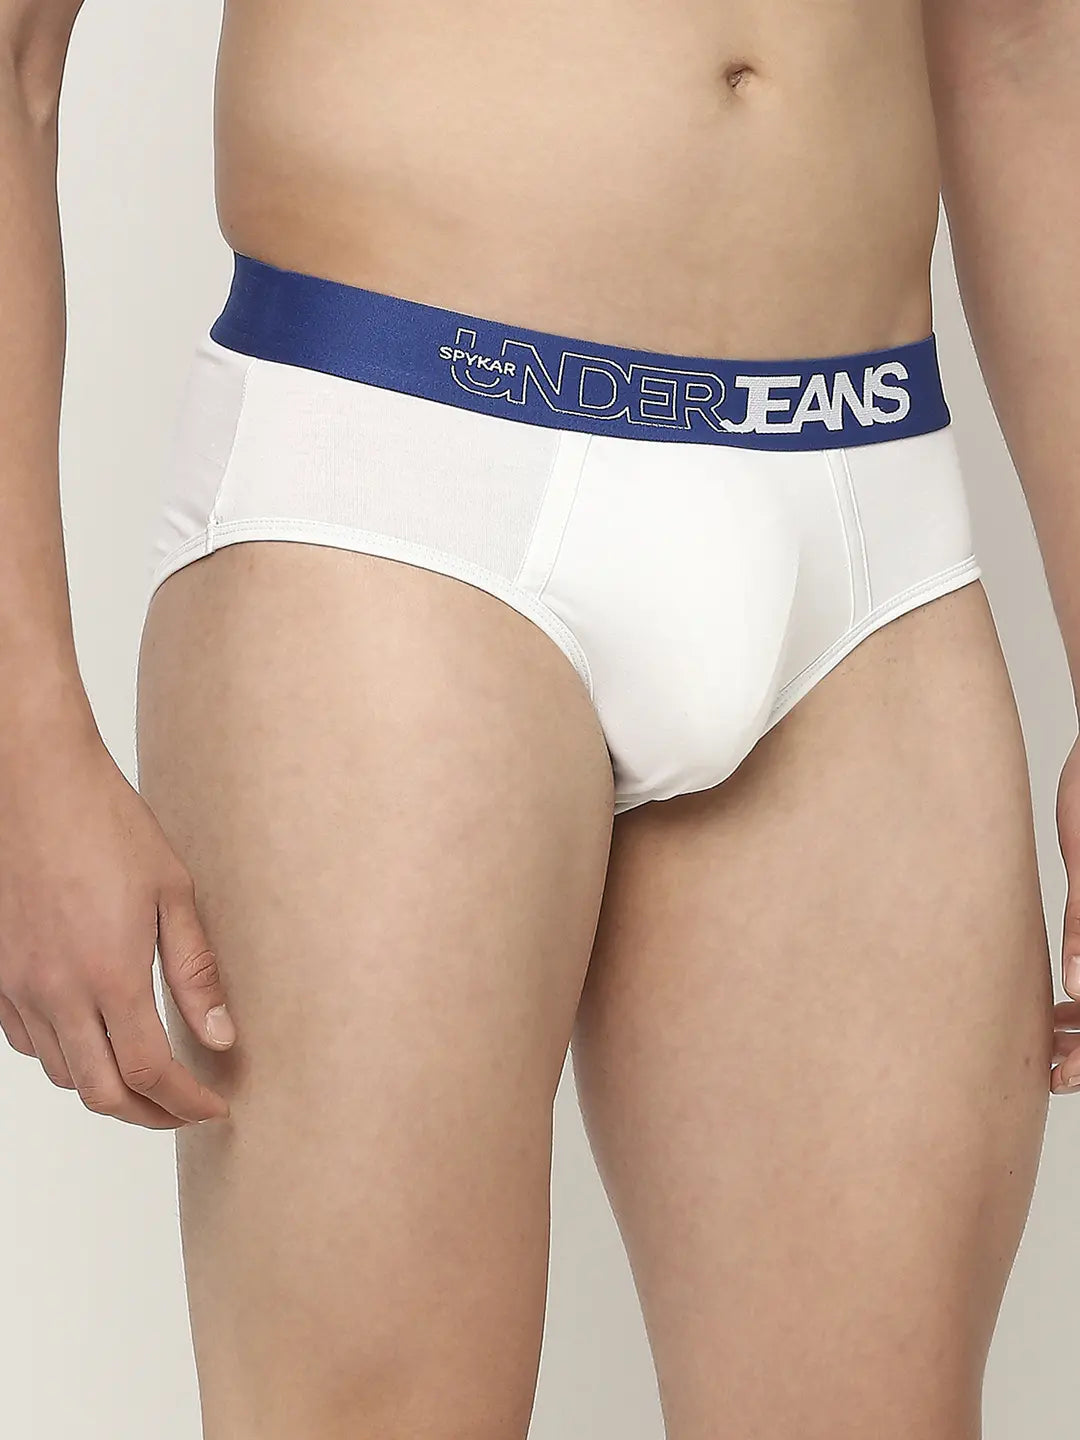 Buy Cotton Printed Brief - Pack Of 3- Underjeans By Spykar